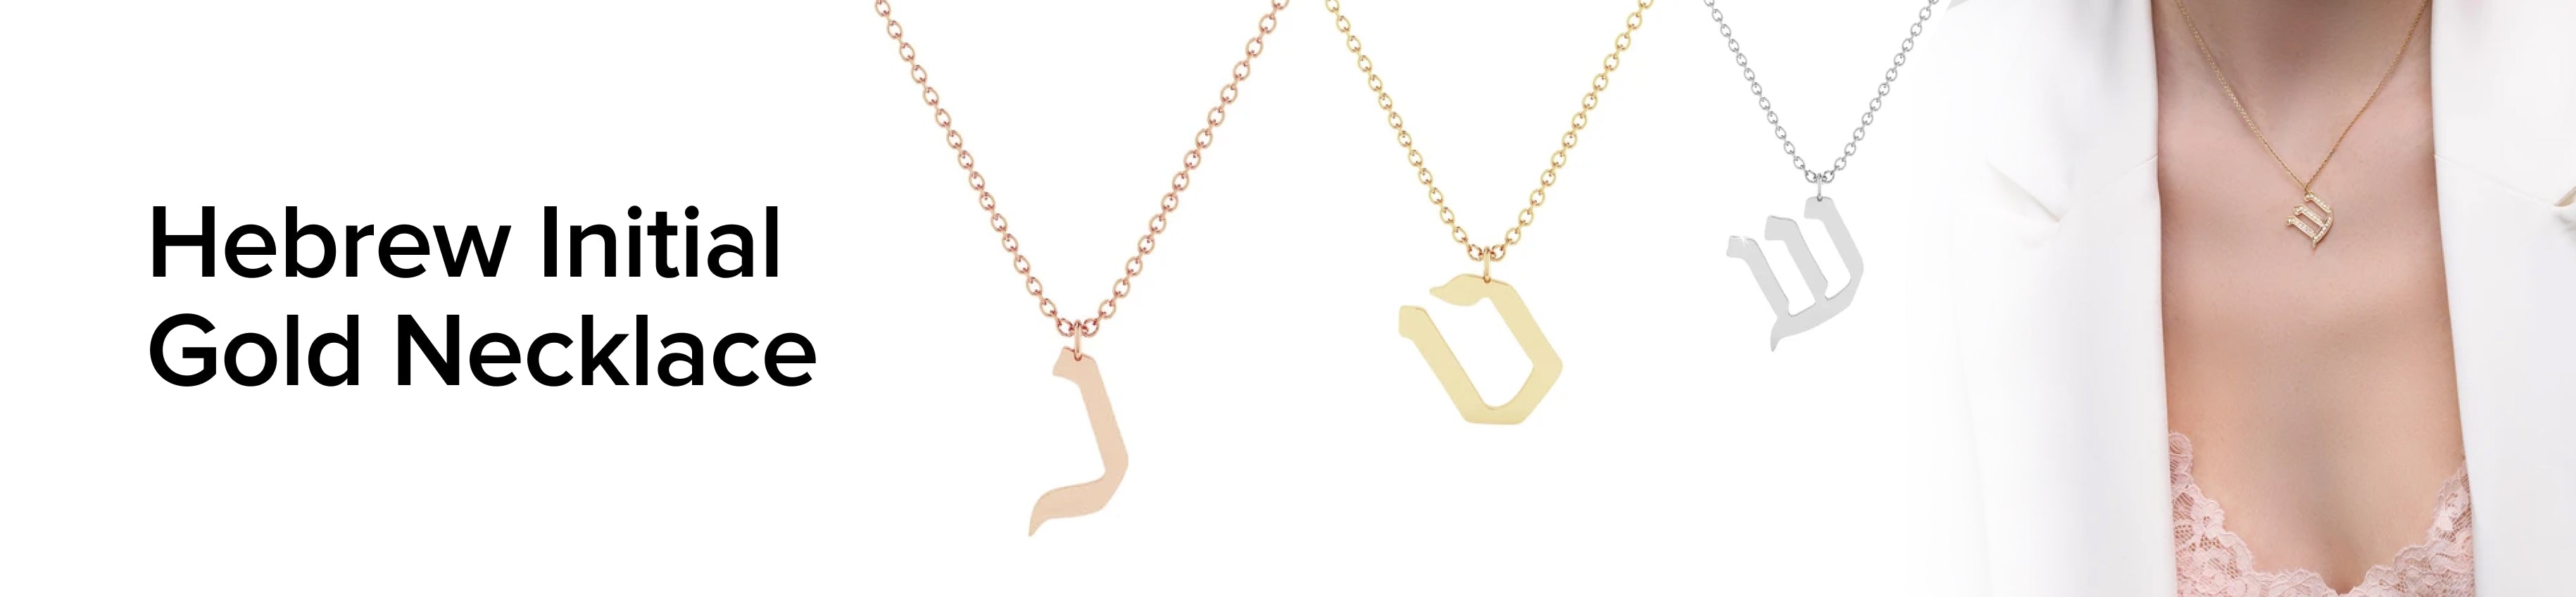 Hebrew Initial Gold Necklace Banner